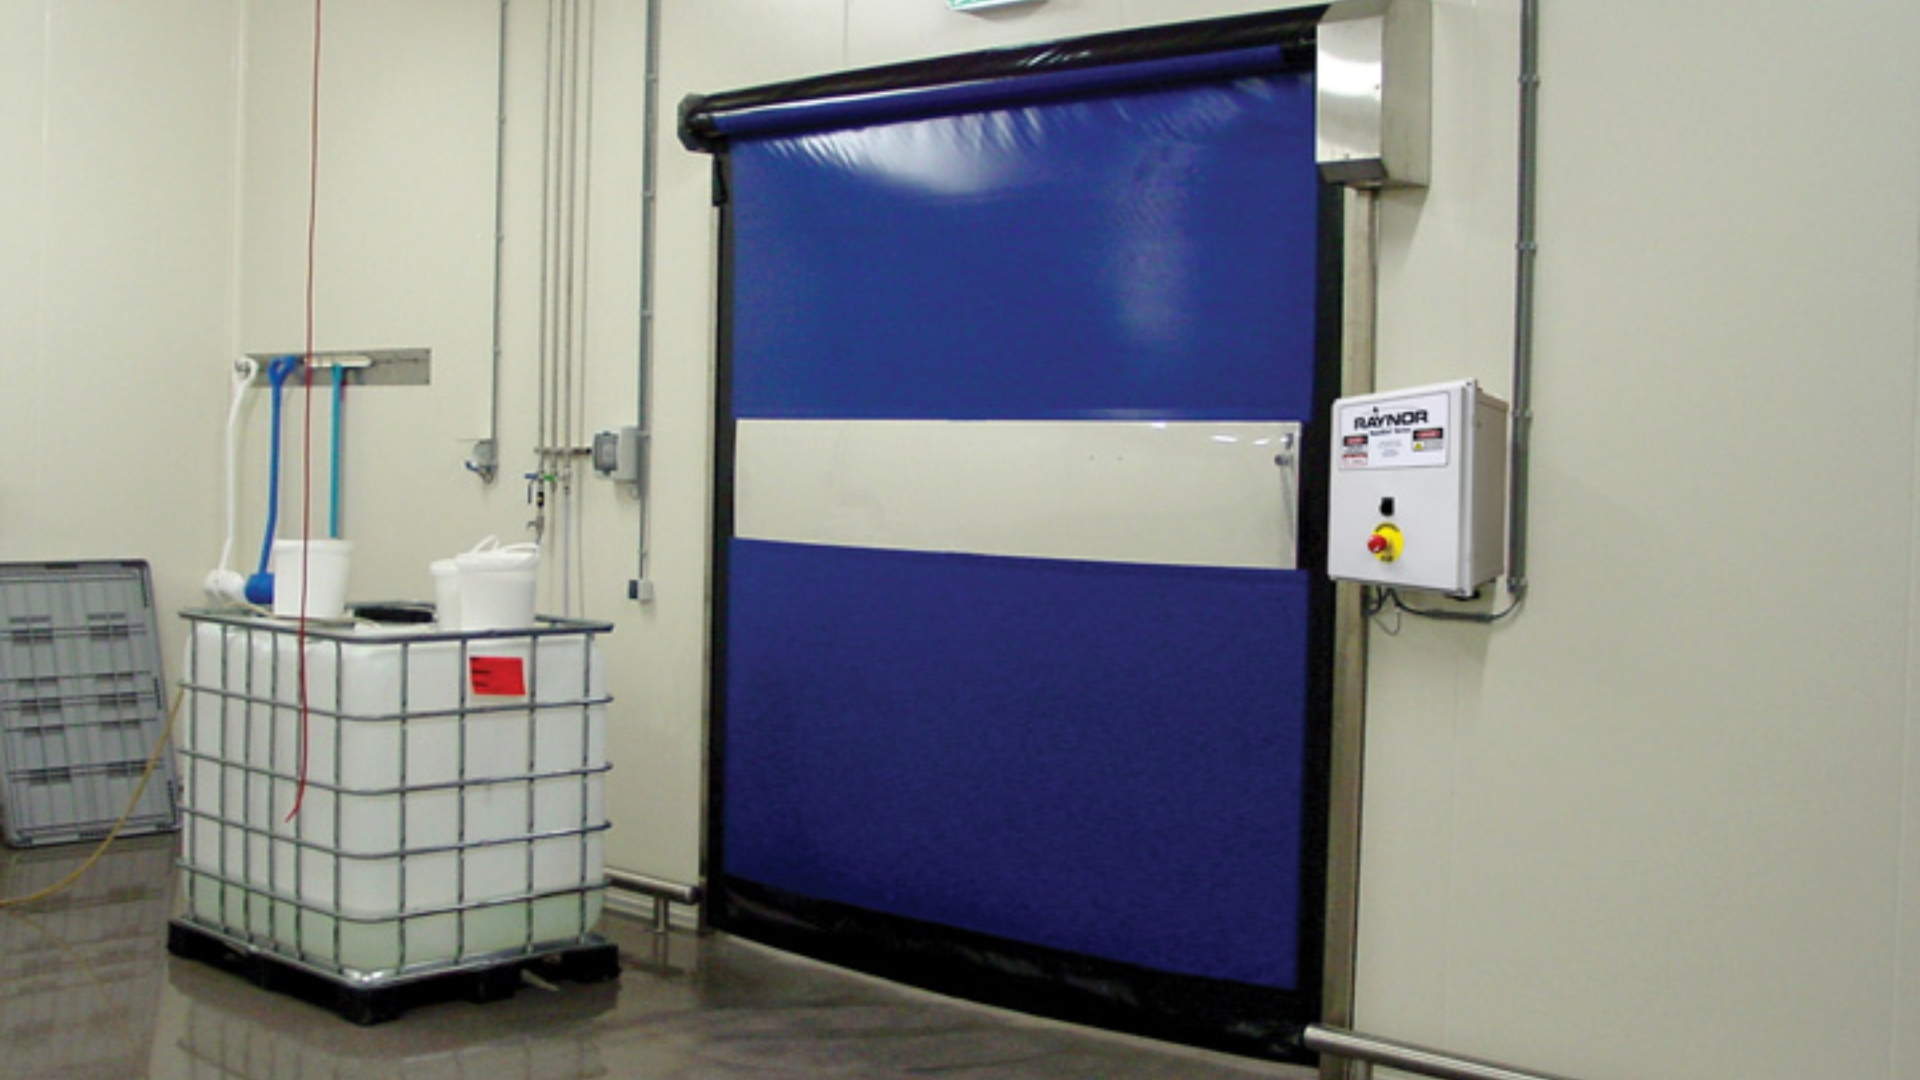 A Raynor high-performance door in a commercial facility